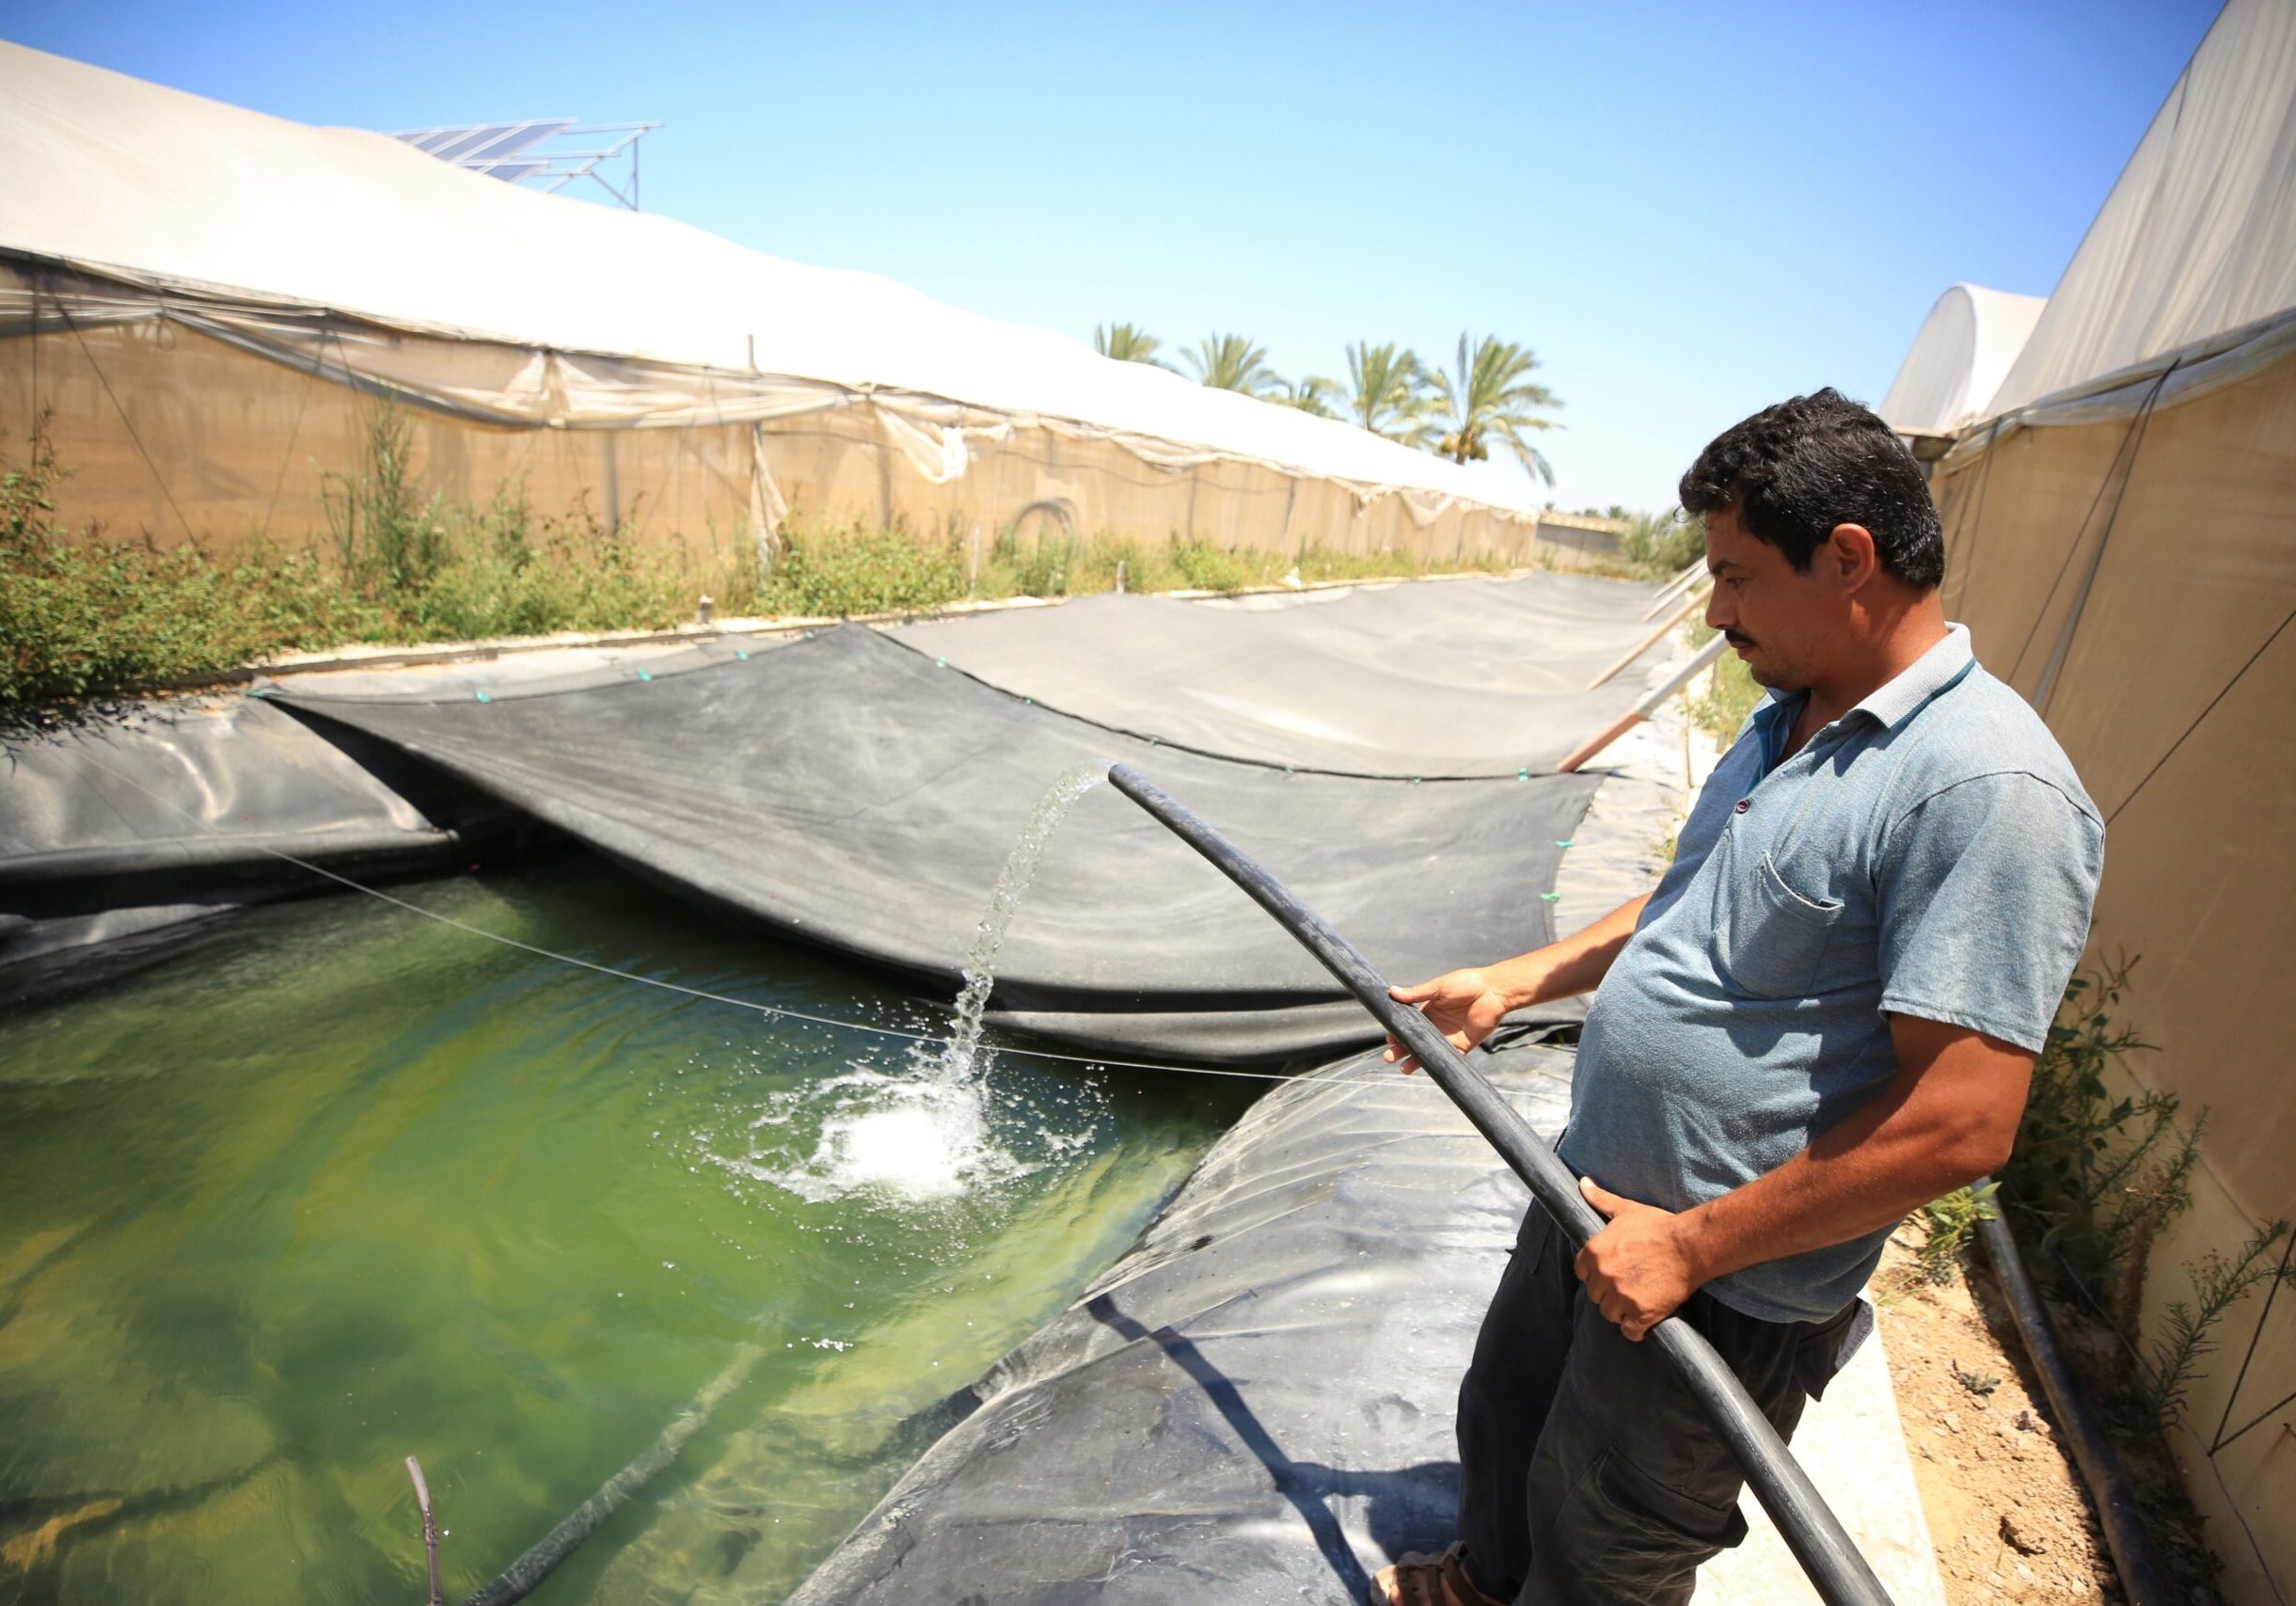 Gaza Strip, Al-Musaddar village. A fish farmer pours water into the pools of a fish farm. The water is collected through rainwater harvesting and solar energy. The fish farm is part of an agricultural project supported by the ICRC.